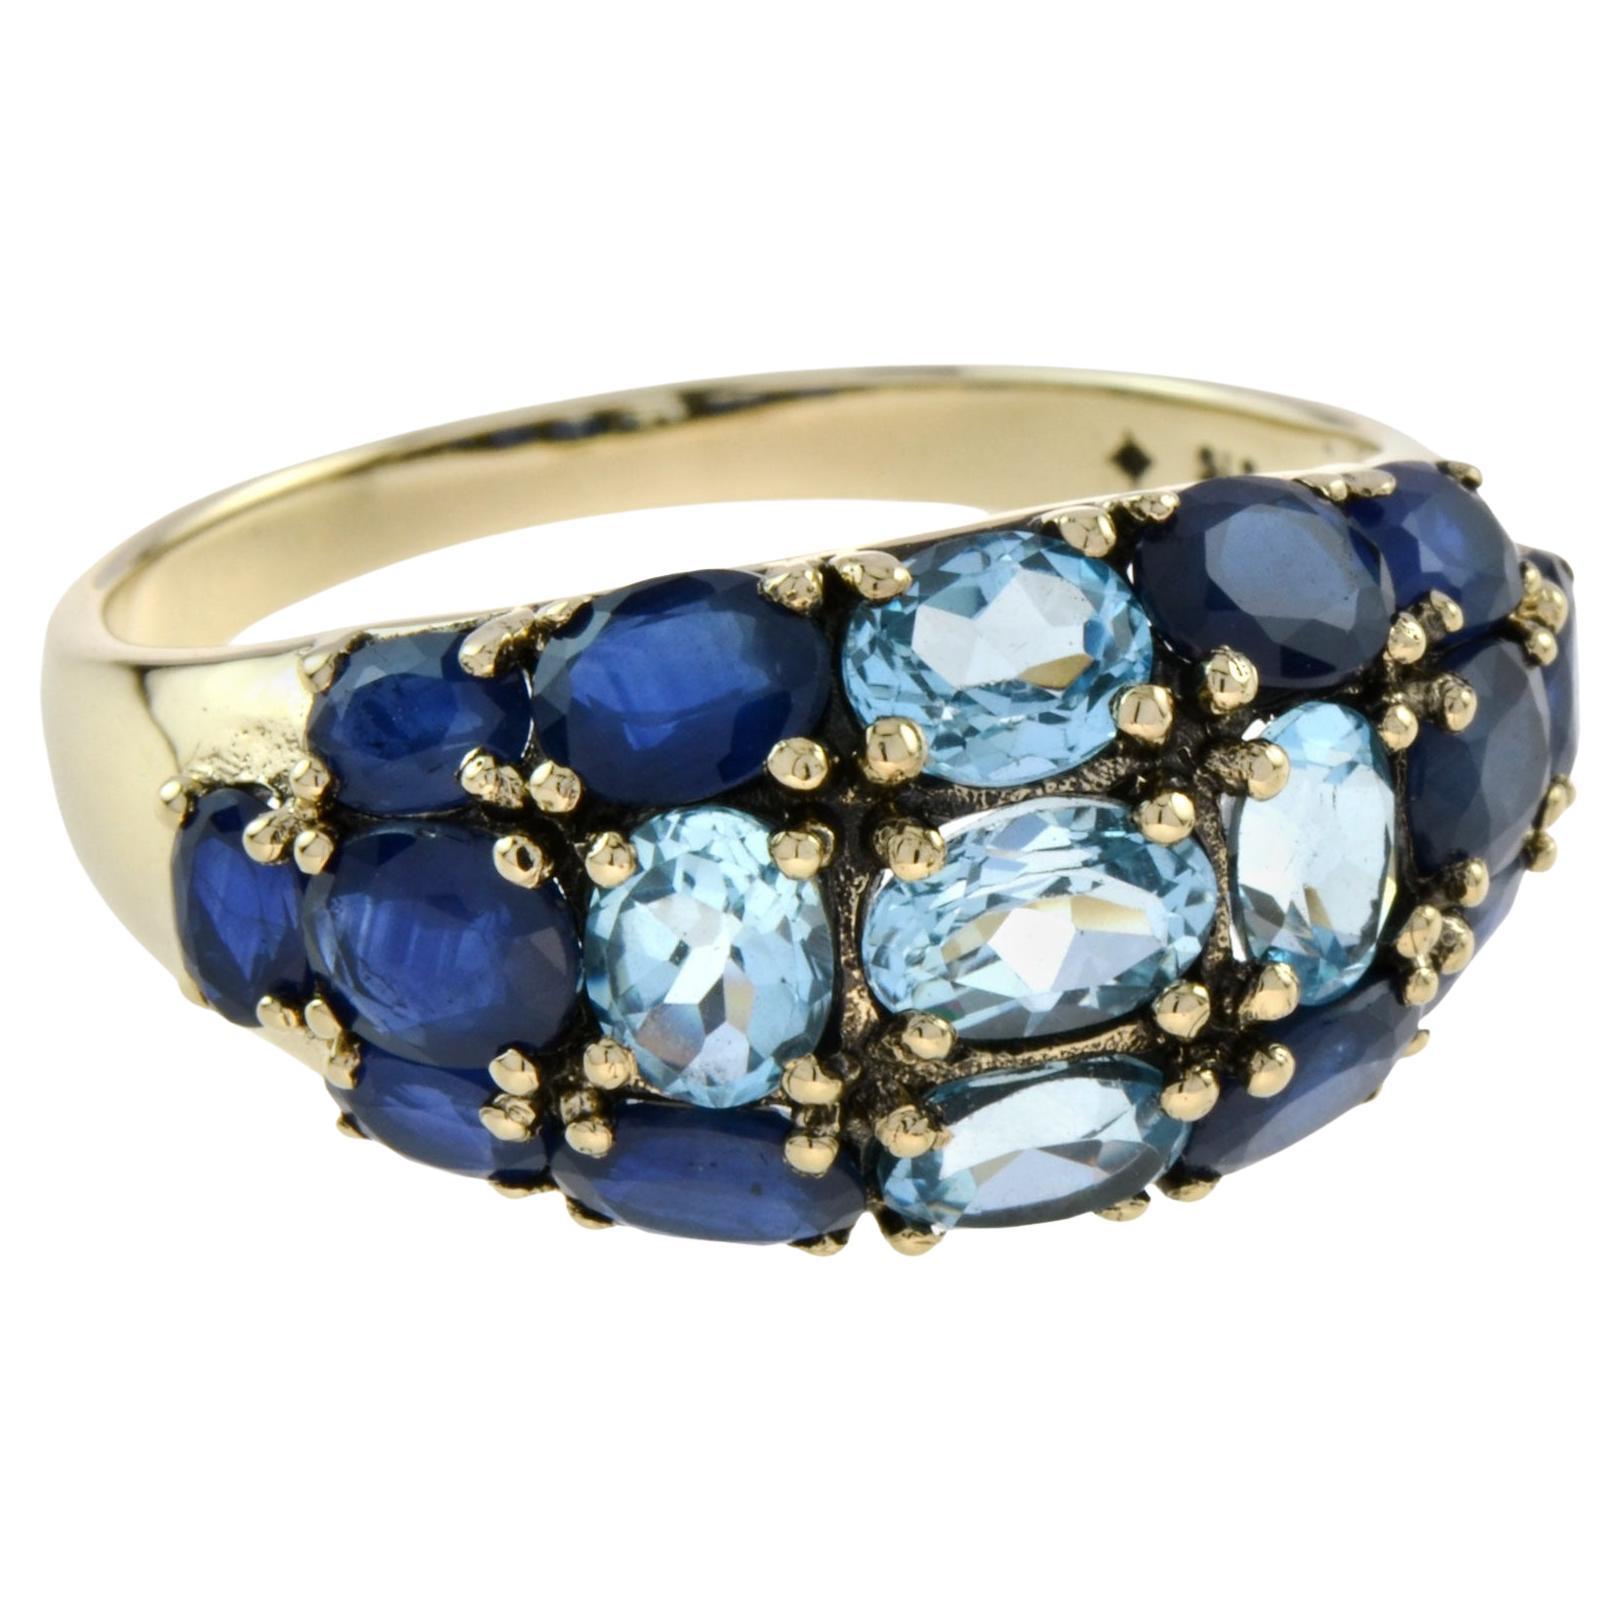 For Sale:  Vintage Style Blue Topaz and Sapphire Cocktail Ring in 14K Yellow Gold